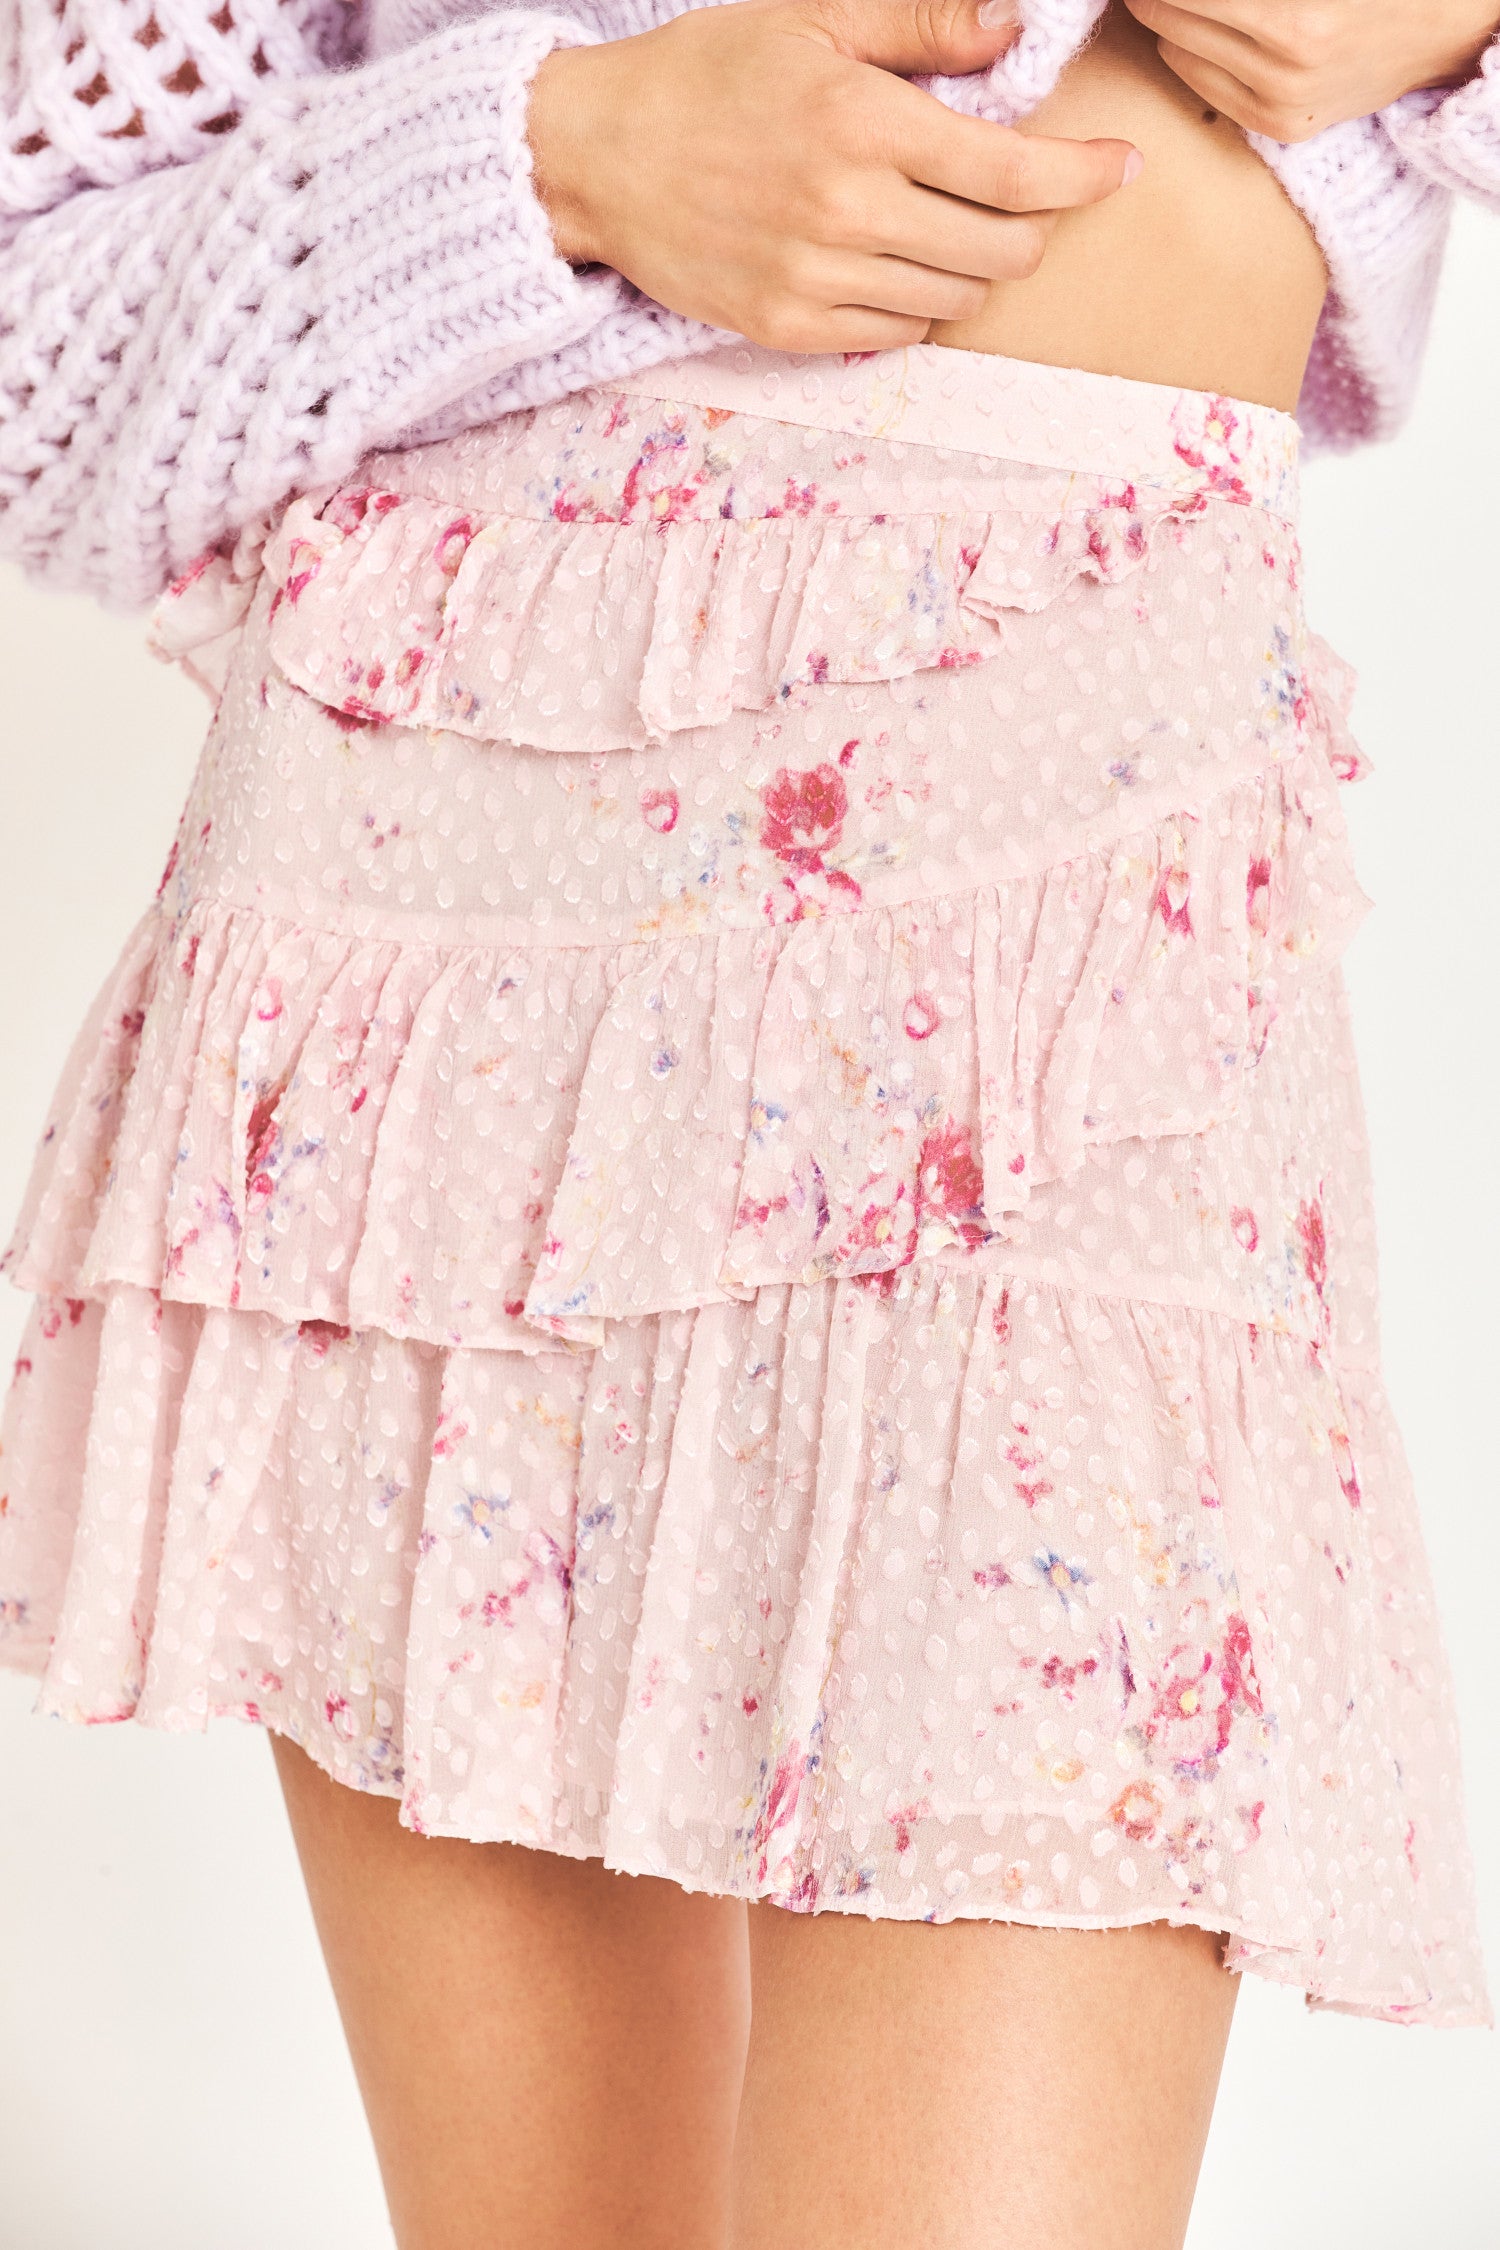 Close up image detailing ruffles and floral print on pink mini skirt